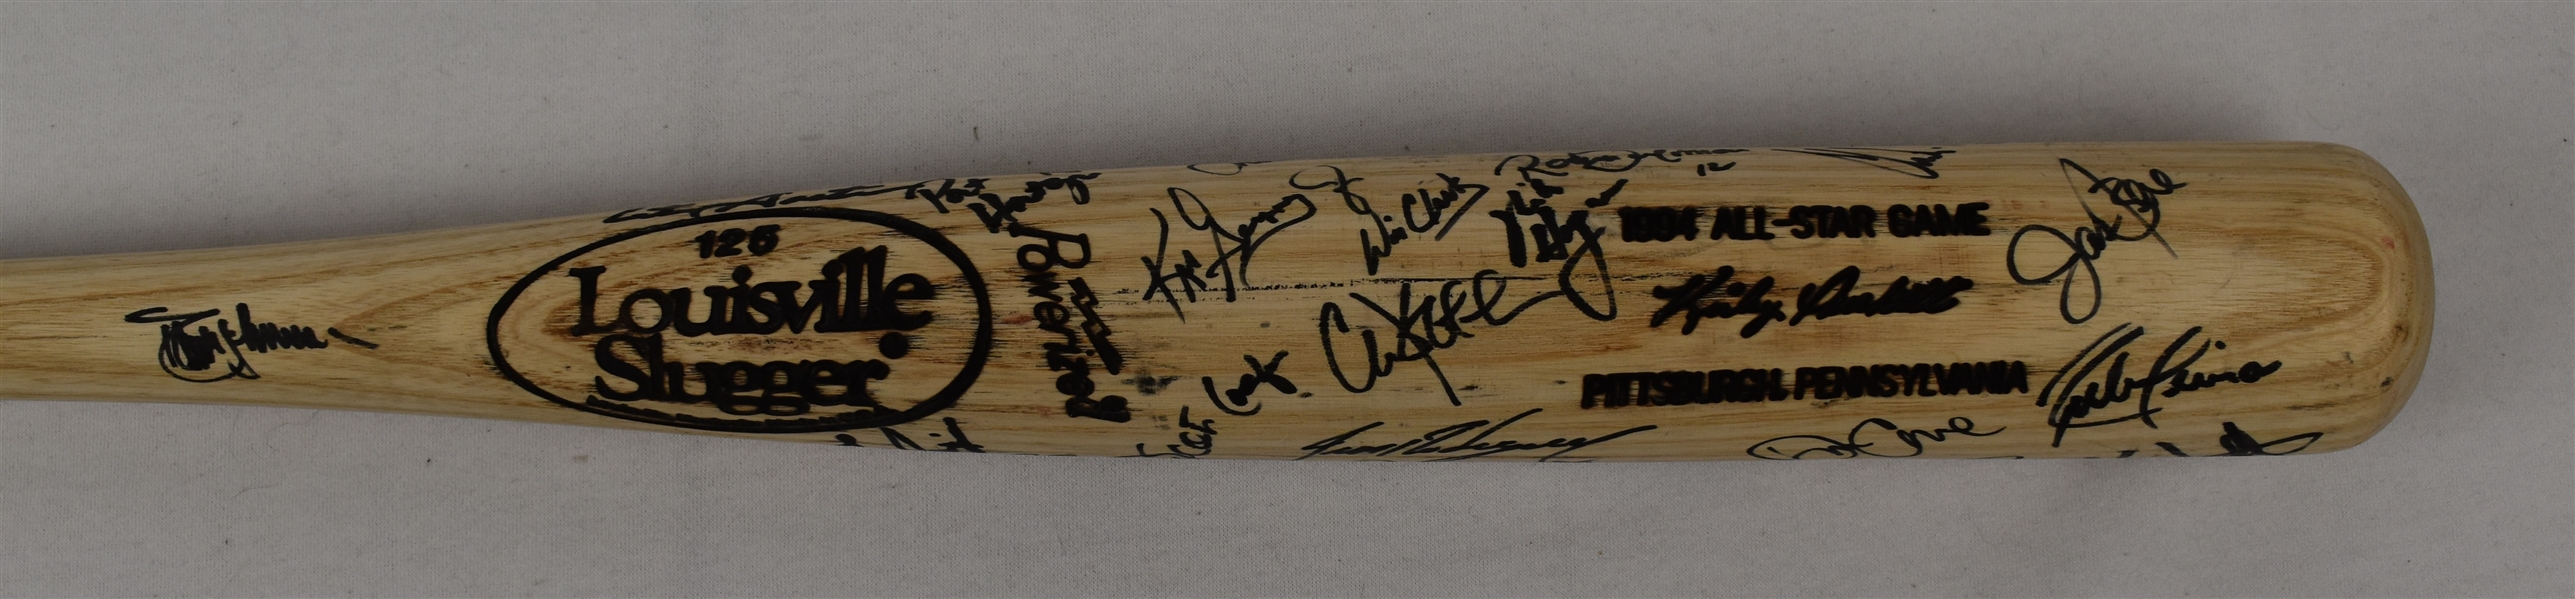 Kirby Pucketts 1994 All-Star Game Used Bat Signed by All-Star Team w/Puckett Family Provenance